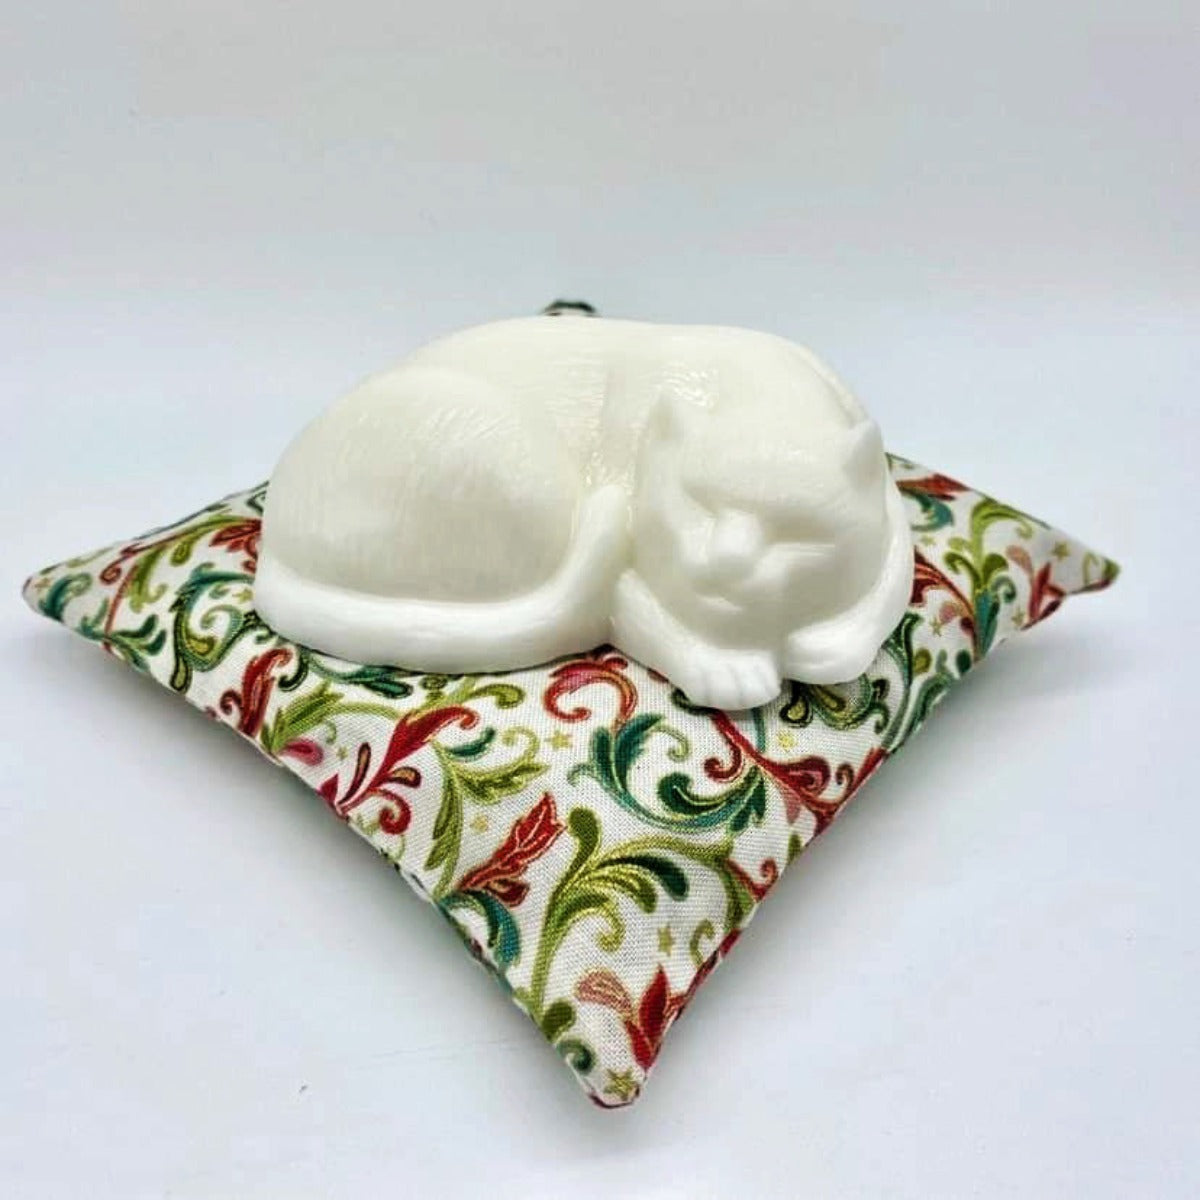 Sleeping Cat on Pillow with Christmas Fabric